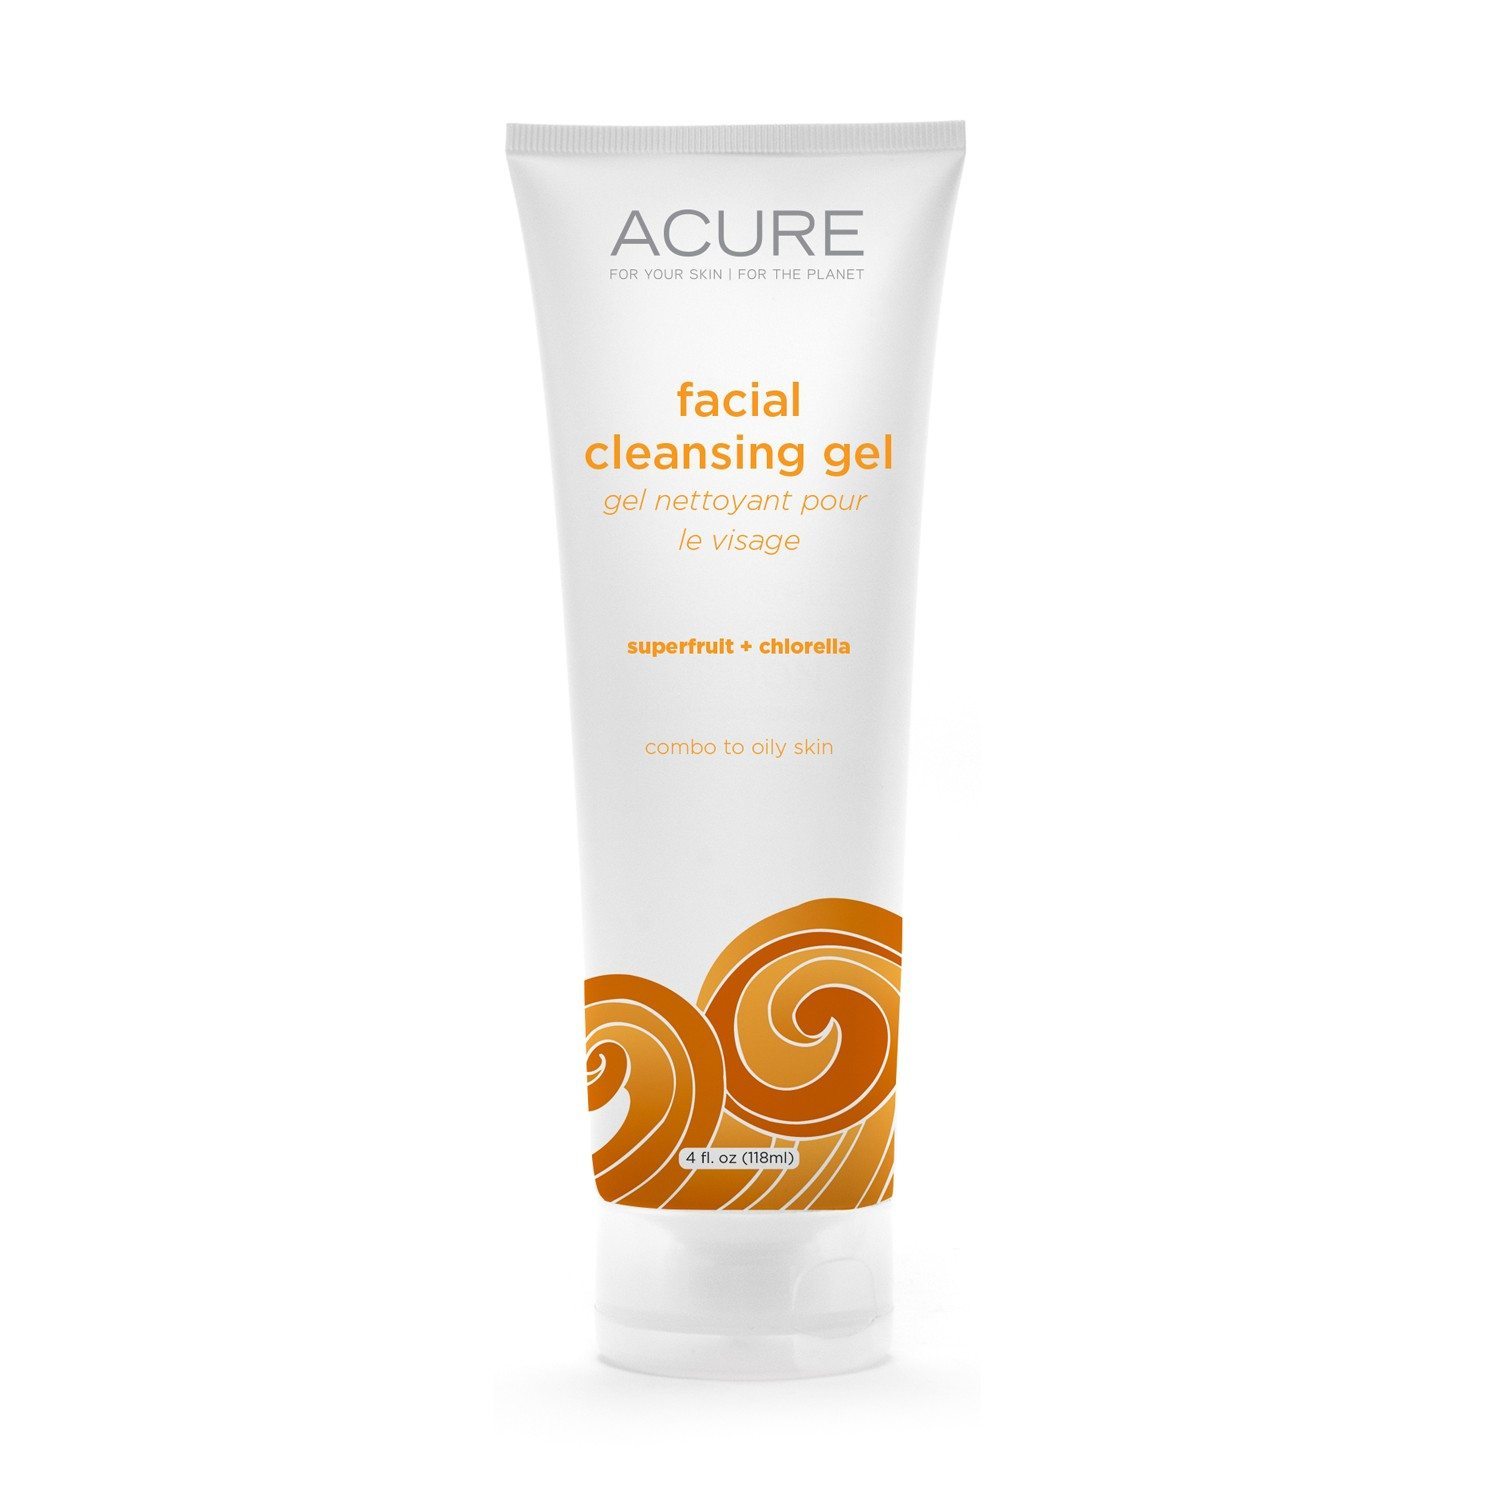 Acure Facial Cleansing Gel Superfruit